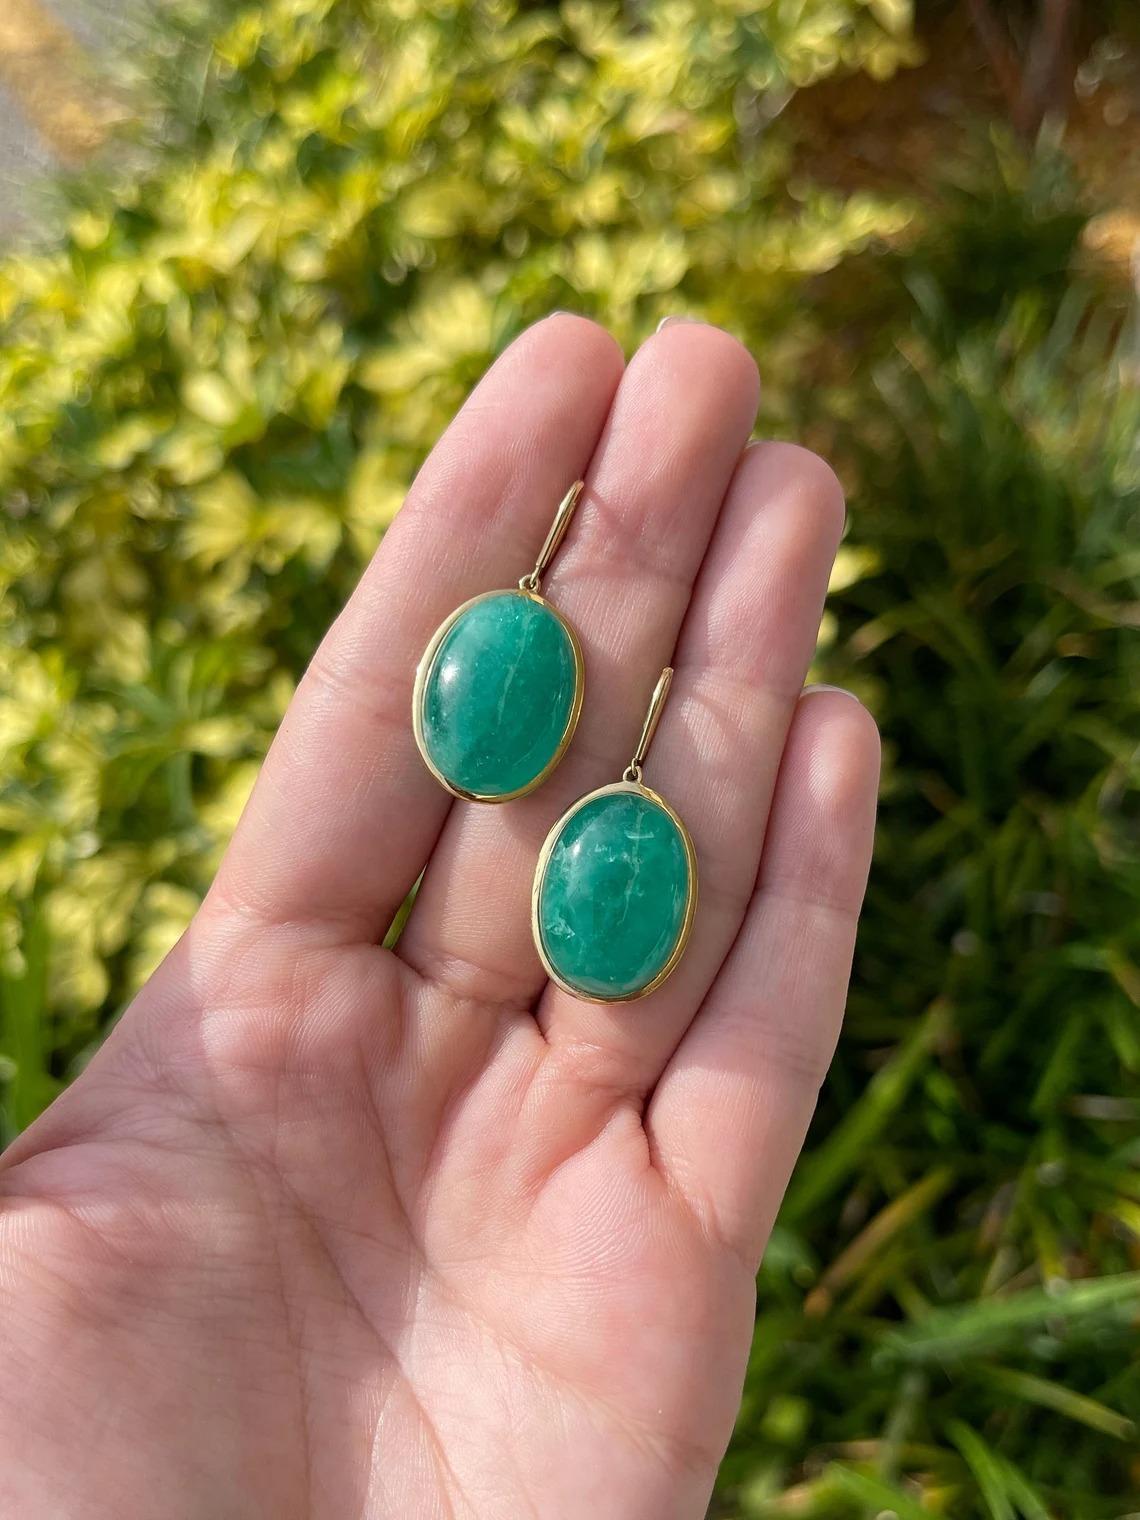 An impressive ONE OF A KIND set of solitaire huge Colombian emerald hook earrings in fine 18K yellow gold. Displayed are ethically earth-mined emeralds with rich deep green color accented by a lightweight, skillfully hand-made golden bezel. The 18K